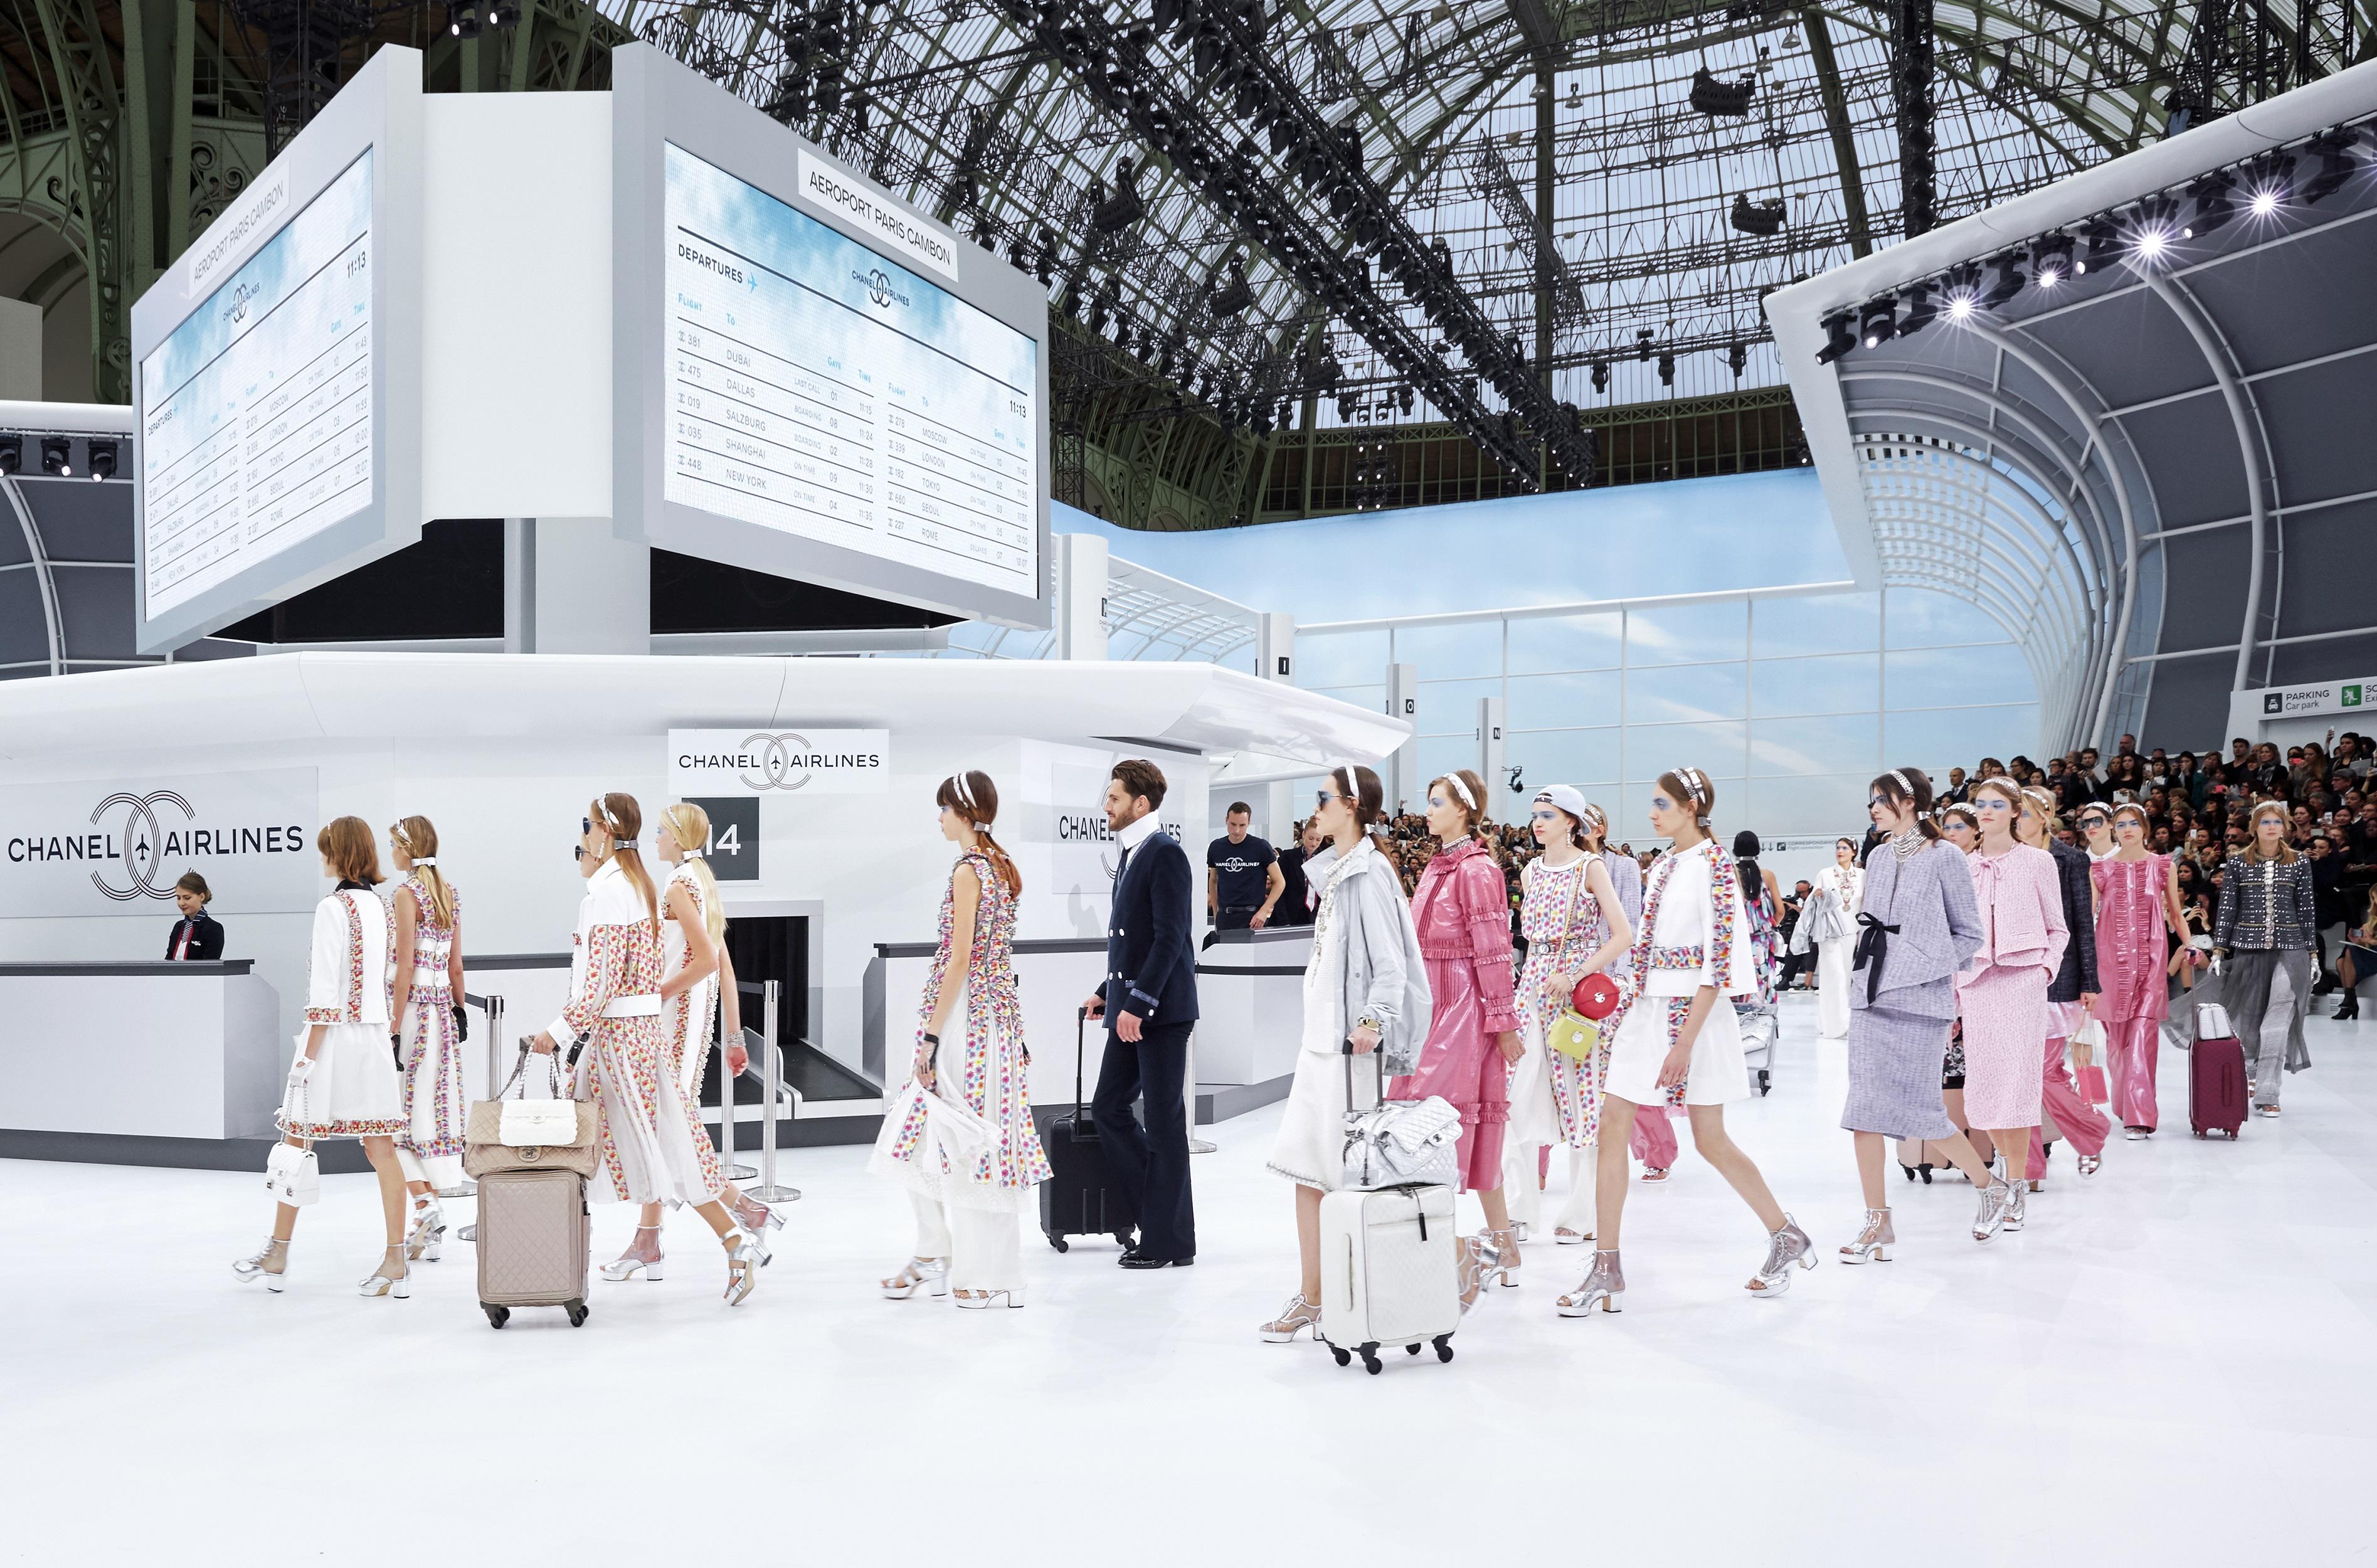 CHANEL on X: Finale from the #ChanelSpringSummer2016 Ready-to-Wear show  #ChanelAirlines. #PFW More on    / X